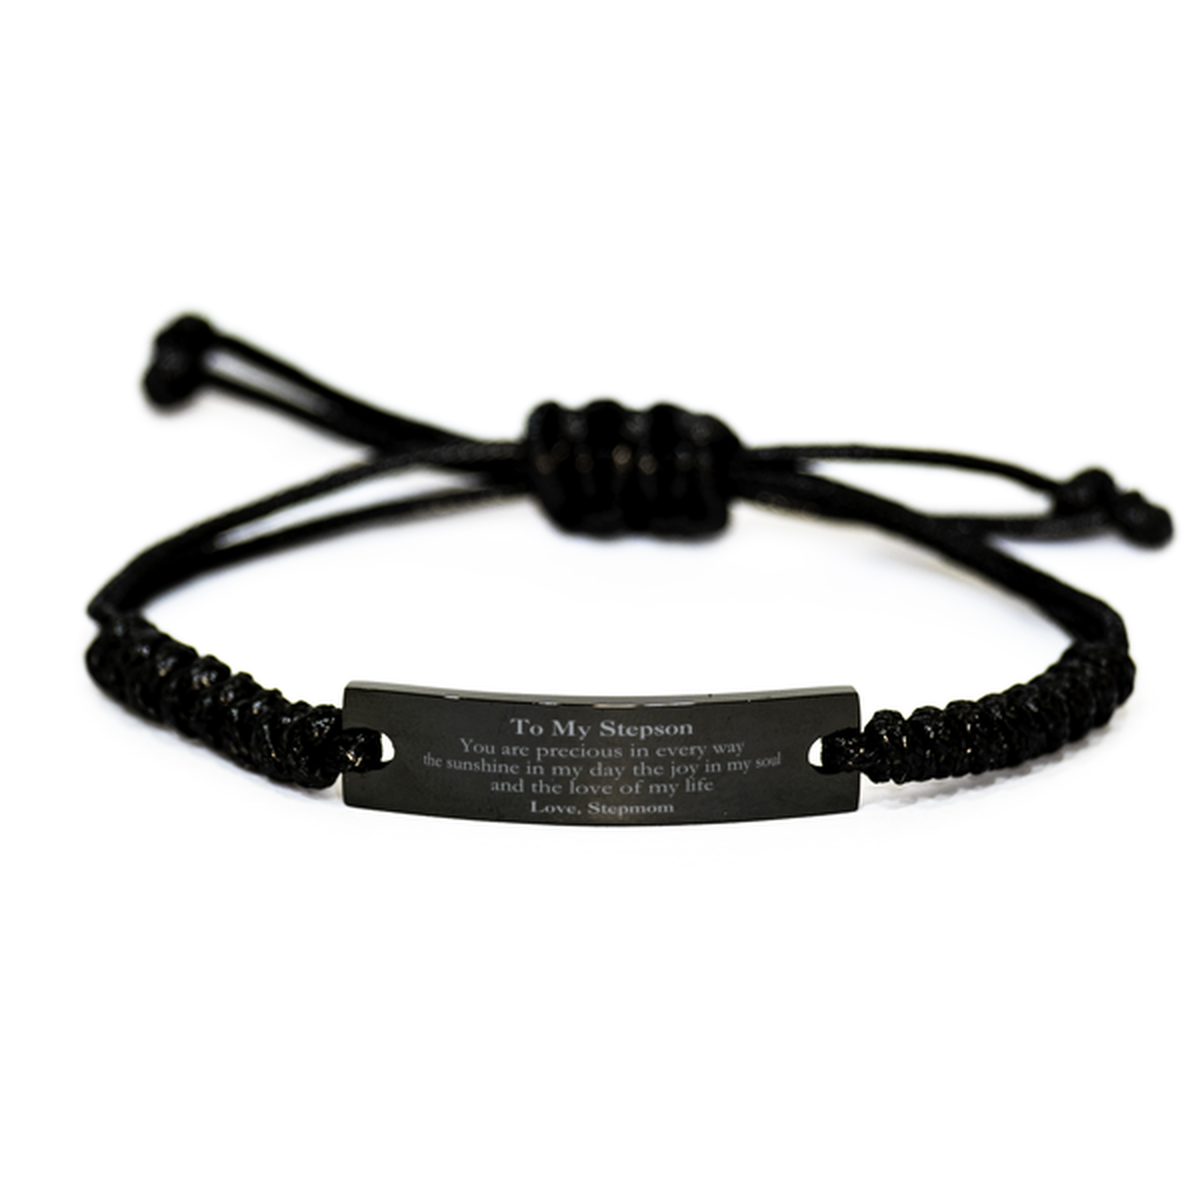 Graduation Gifts for Stepson Black Rope Bracelet Present from Stepmom, Christmas Stepson Birthday Gifts Stepson You are precious in every way the sunshine in my day. Love, Stepmom